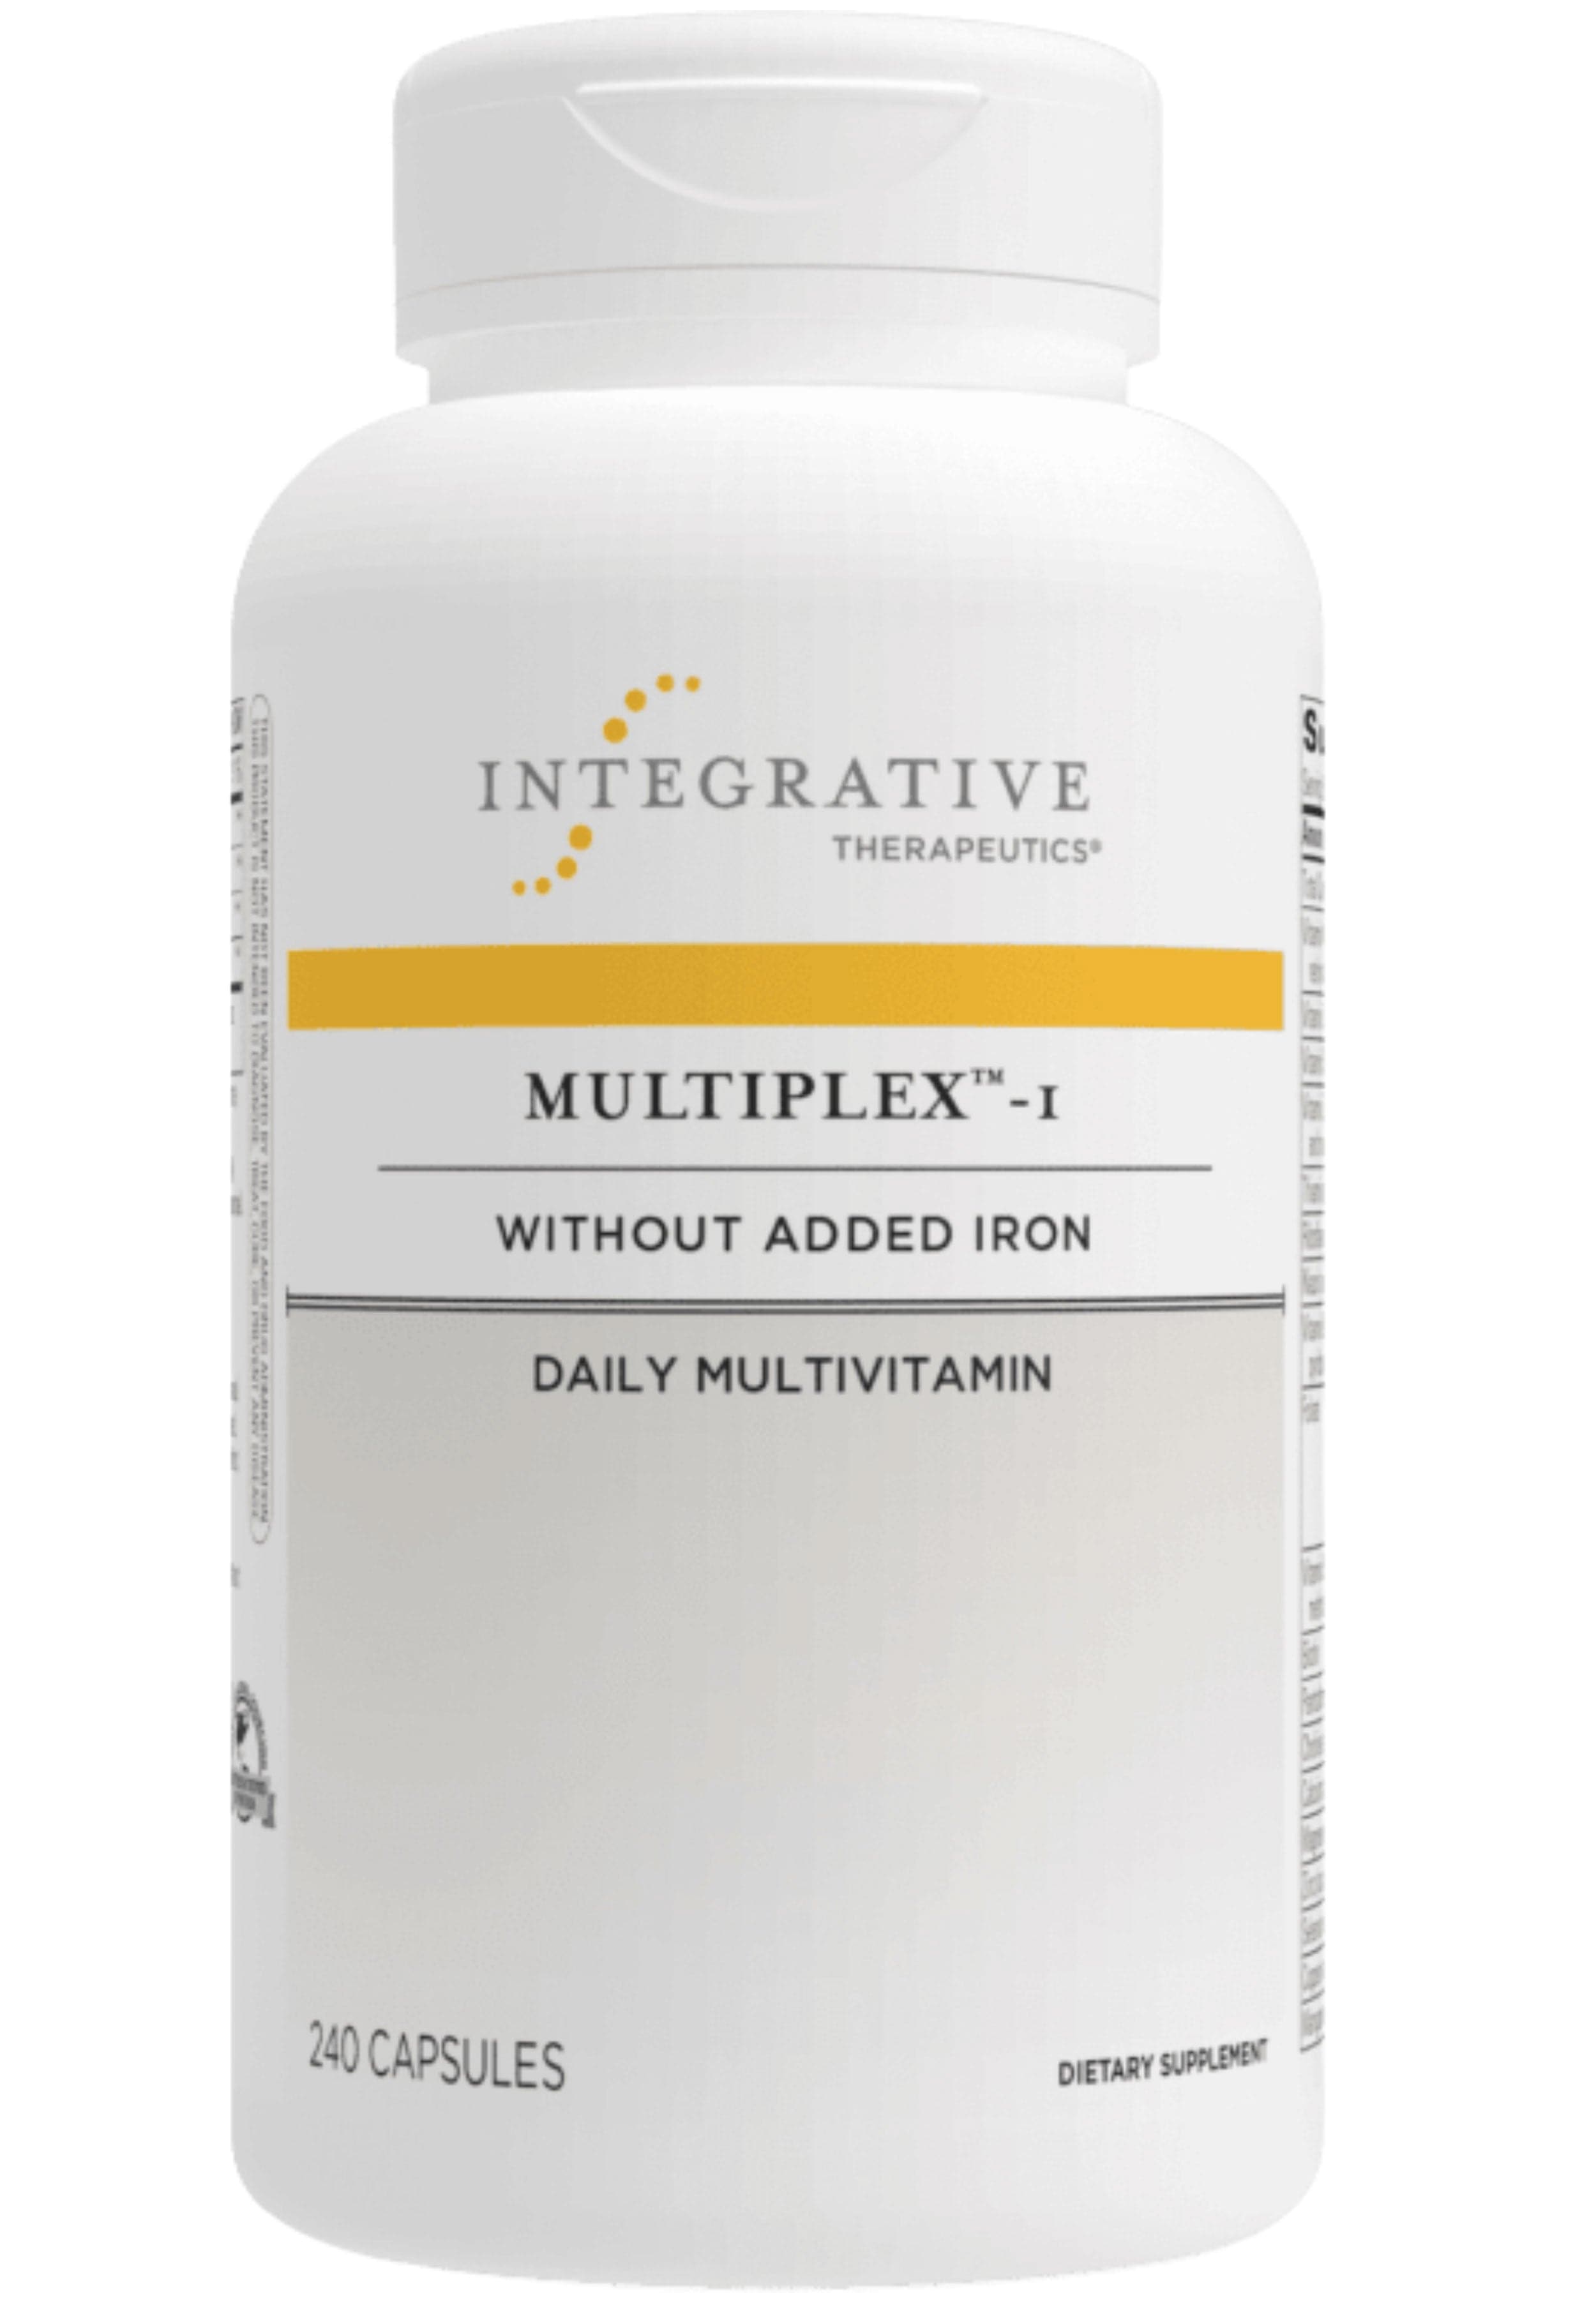 Integrative Therapeutics Multiplex-1 Without Added Iron